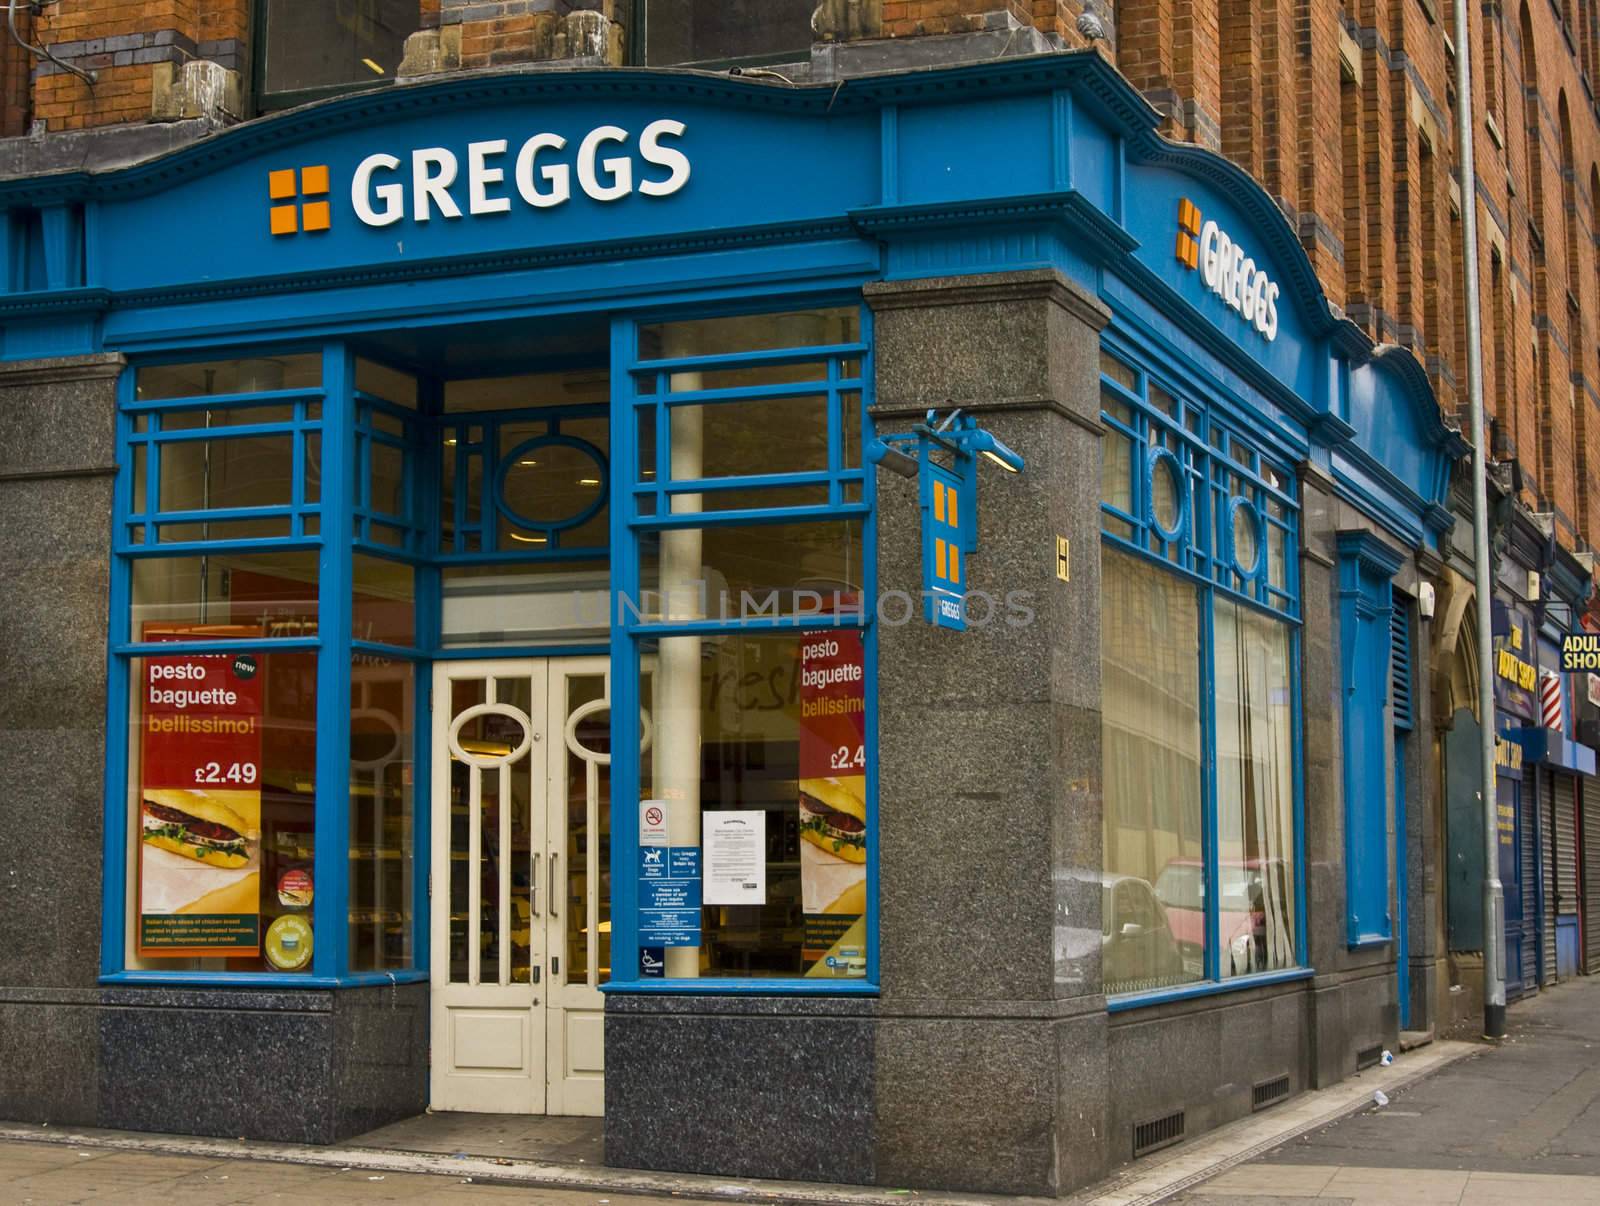 Greggs the baker1 by cvail73